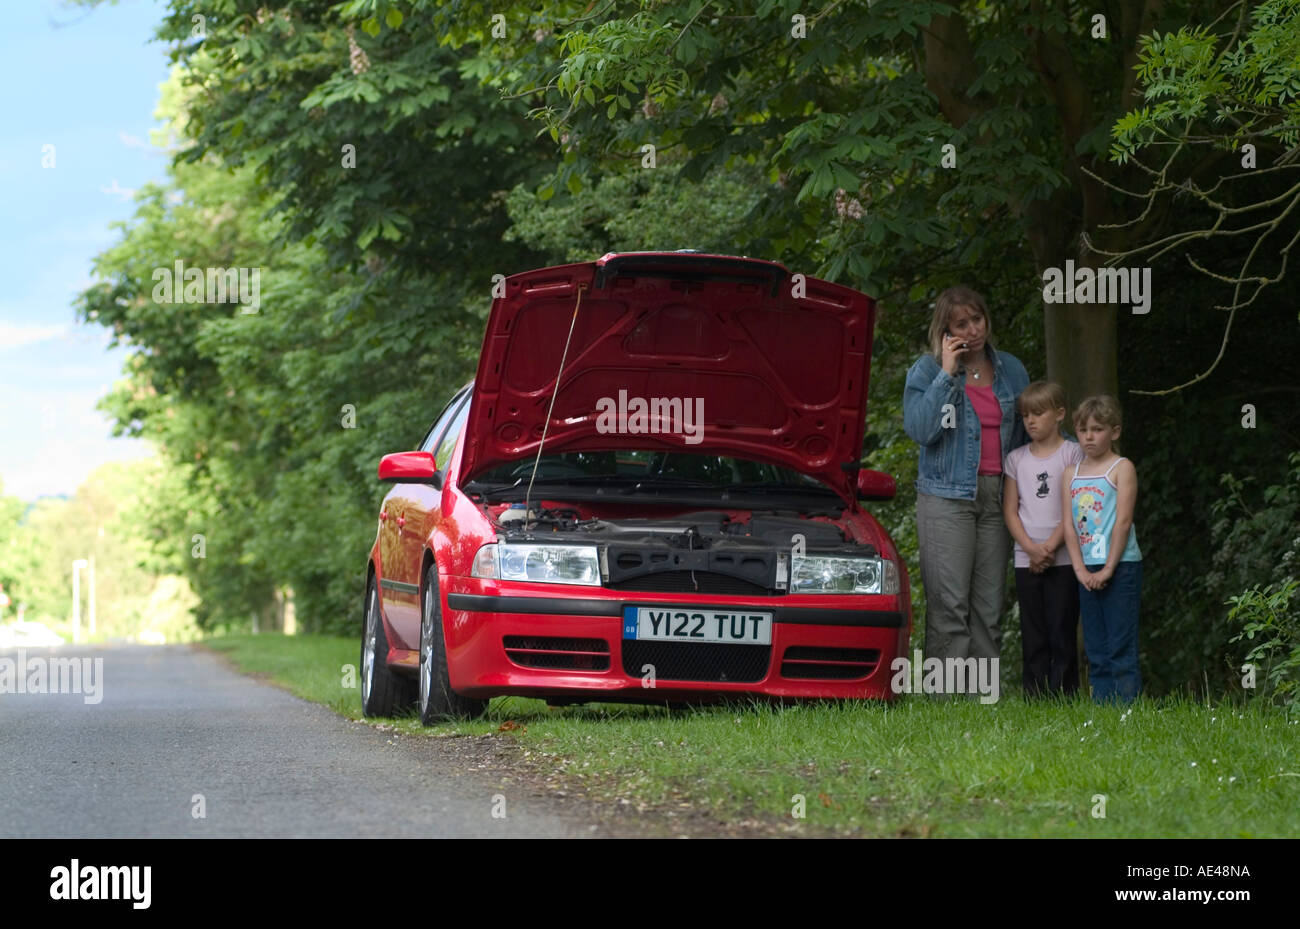 Family at the roadside with car breakdown calling for assistance on a mobile phone. Stock Photo